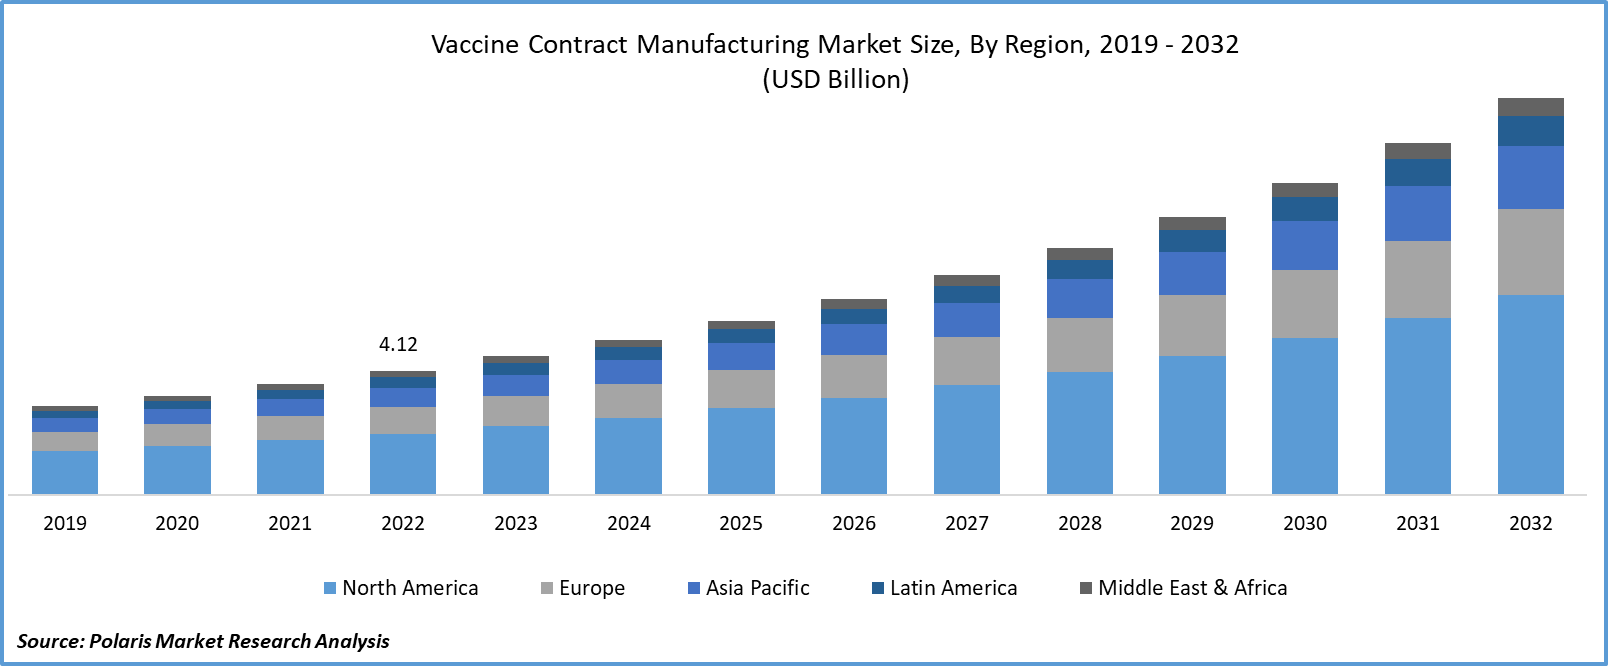 Vaccine Contract Manufacturing Market Size